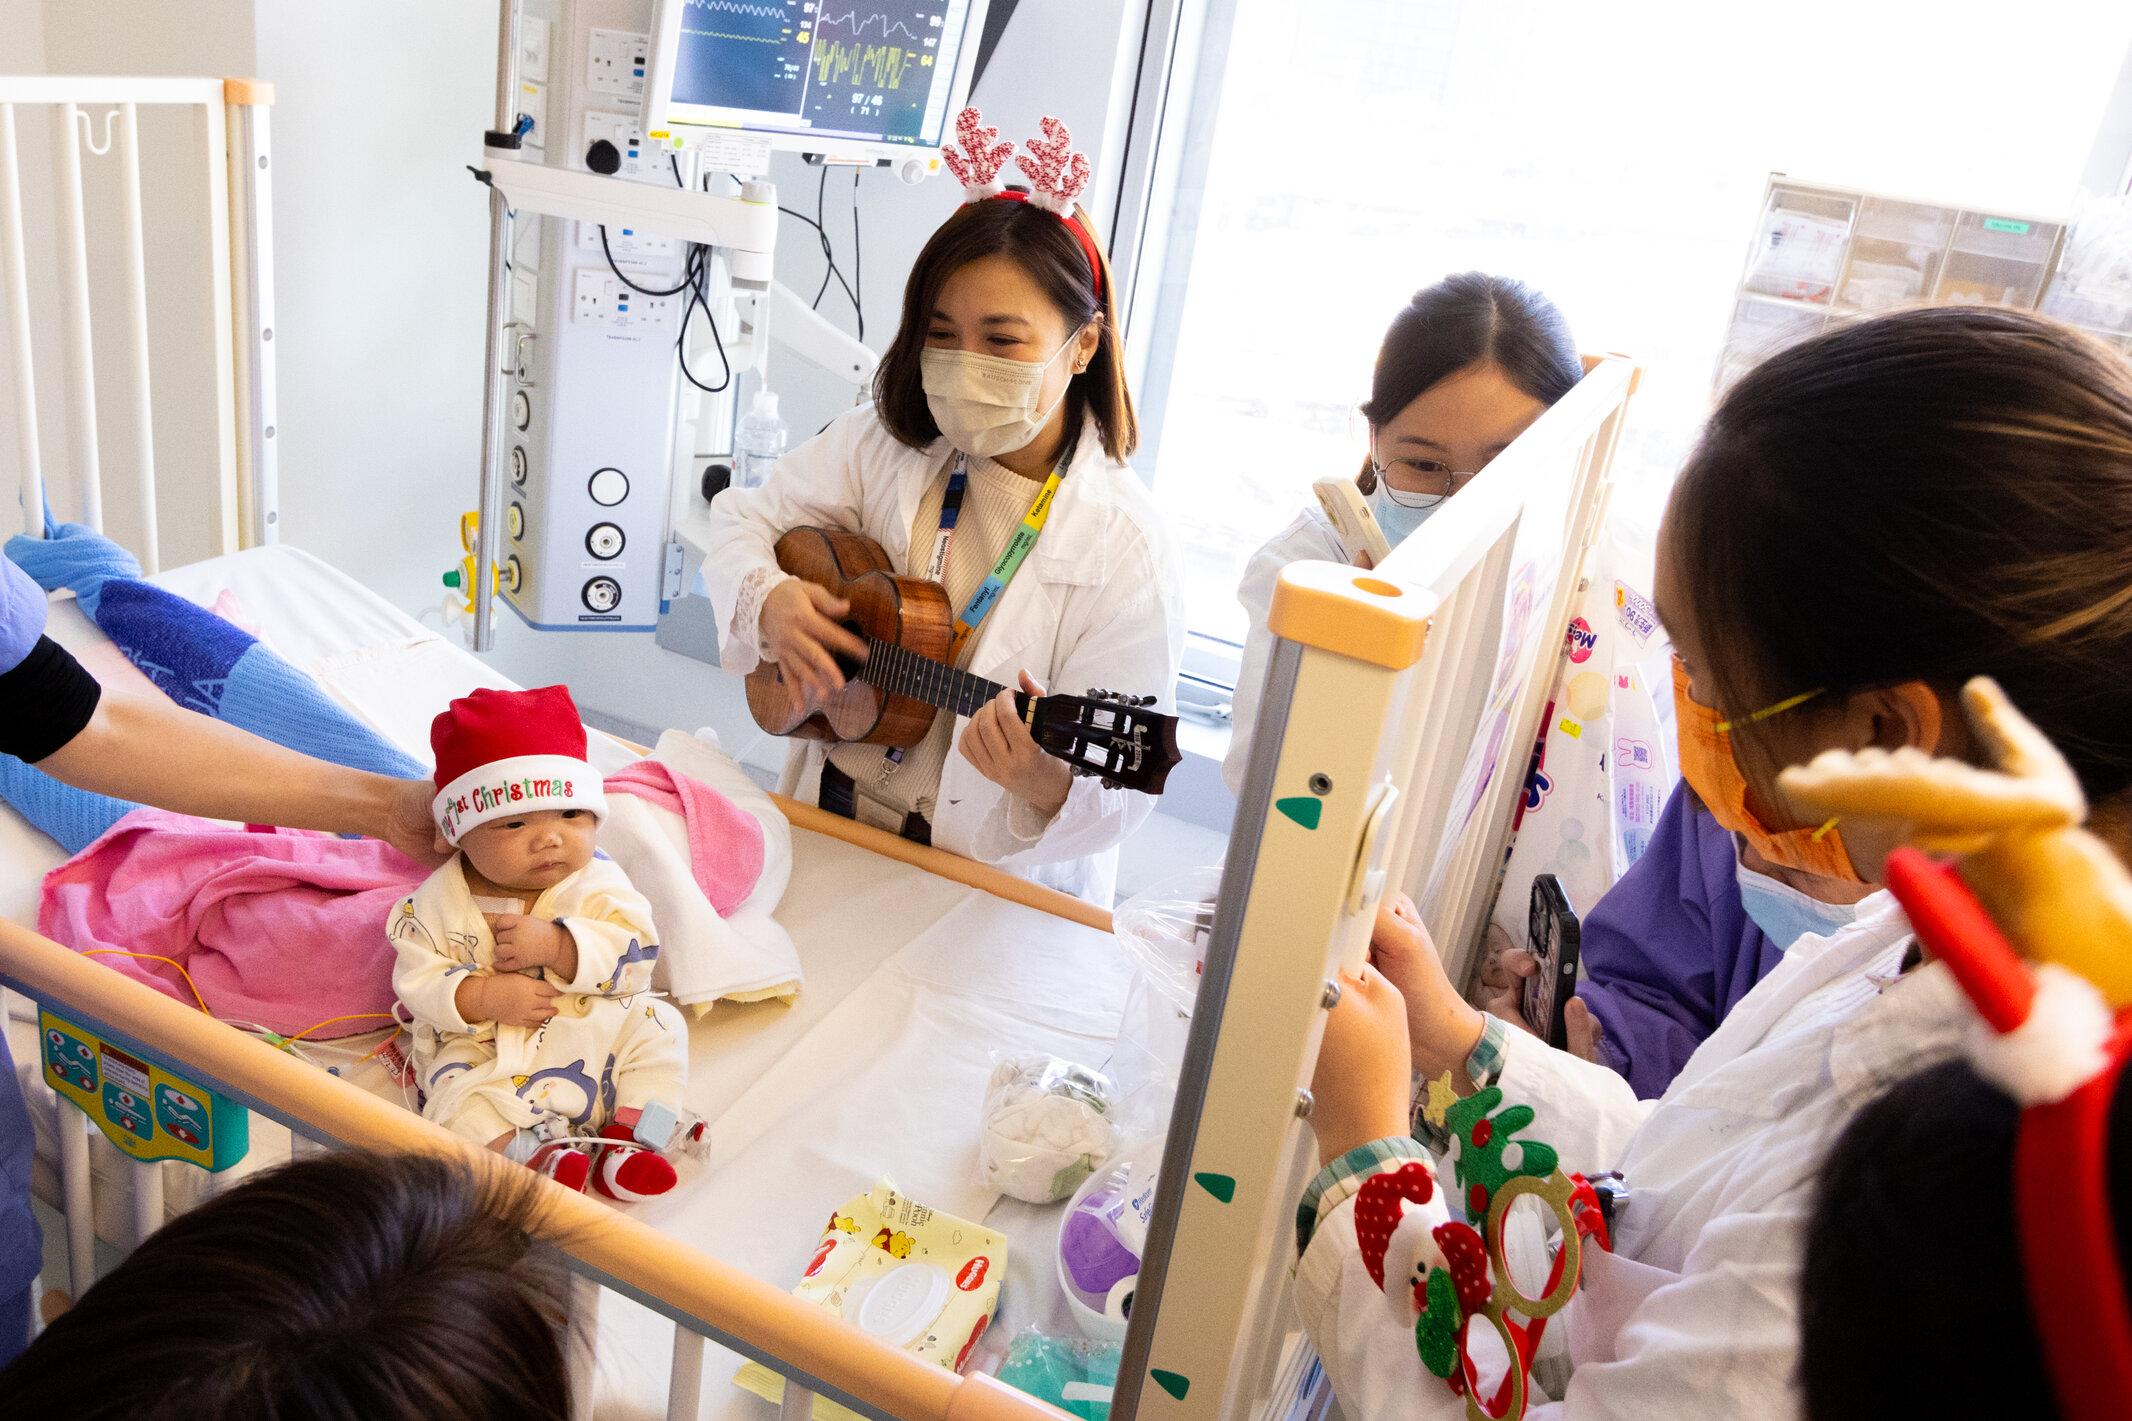 On Christmas day, a doctor of the Hong Kong Children’s Hospital sang Christmas carols to children staying in wards.
